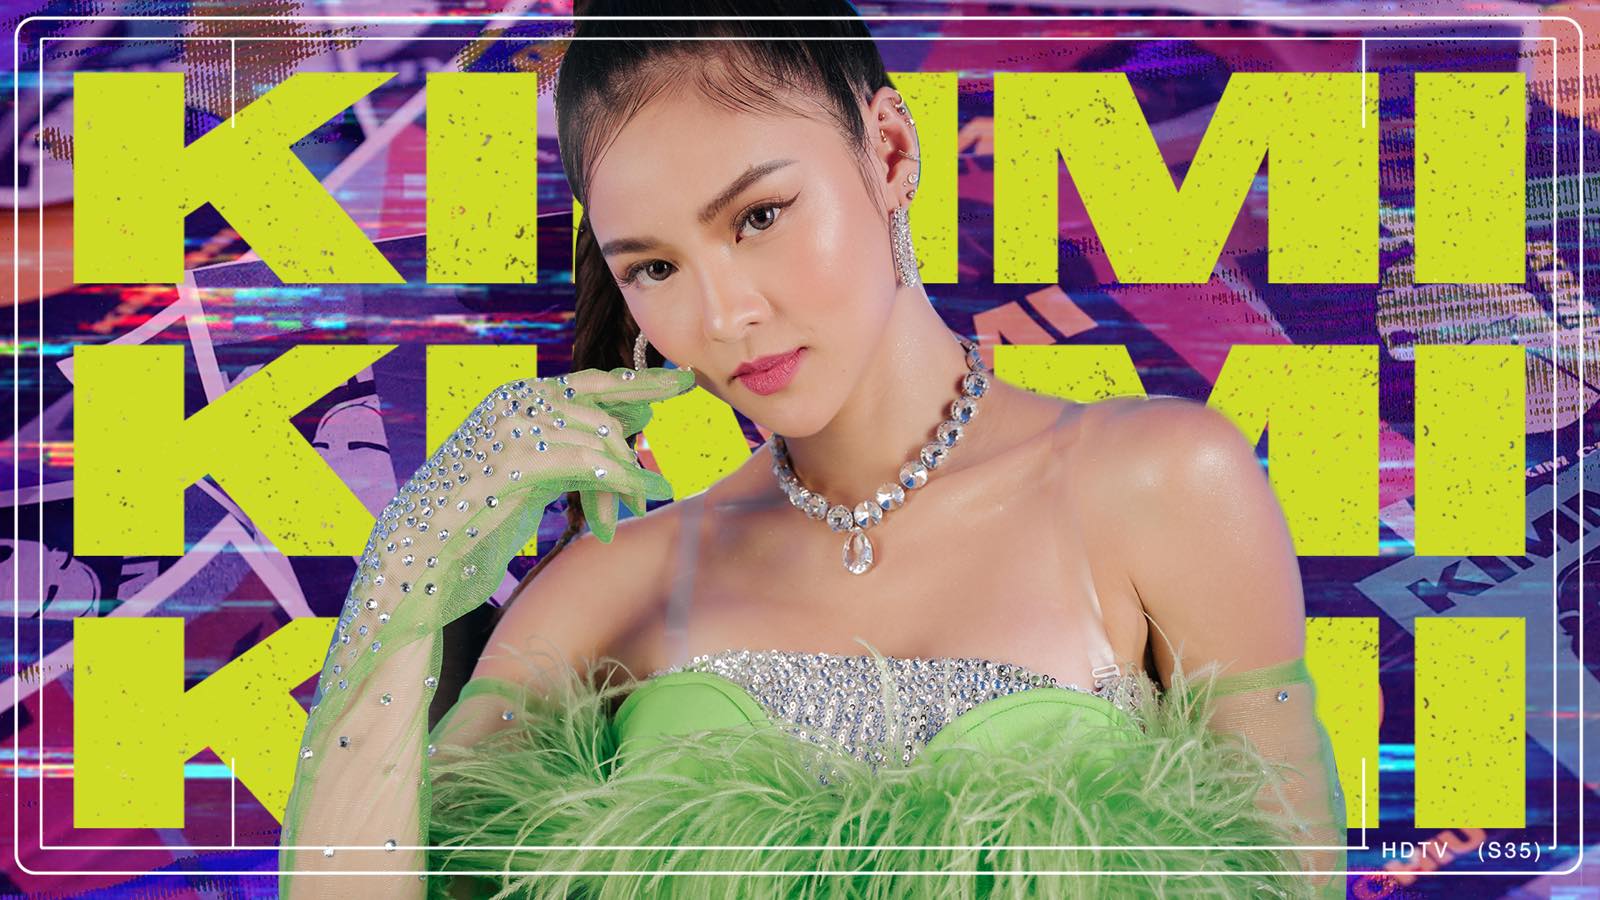 Kim is ‘life of the party’ in “KIMMI” music video